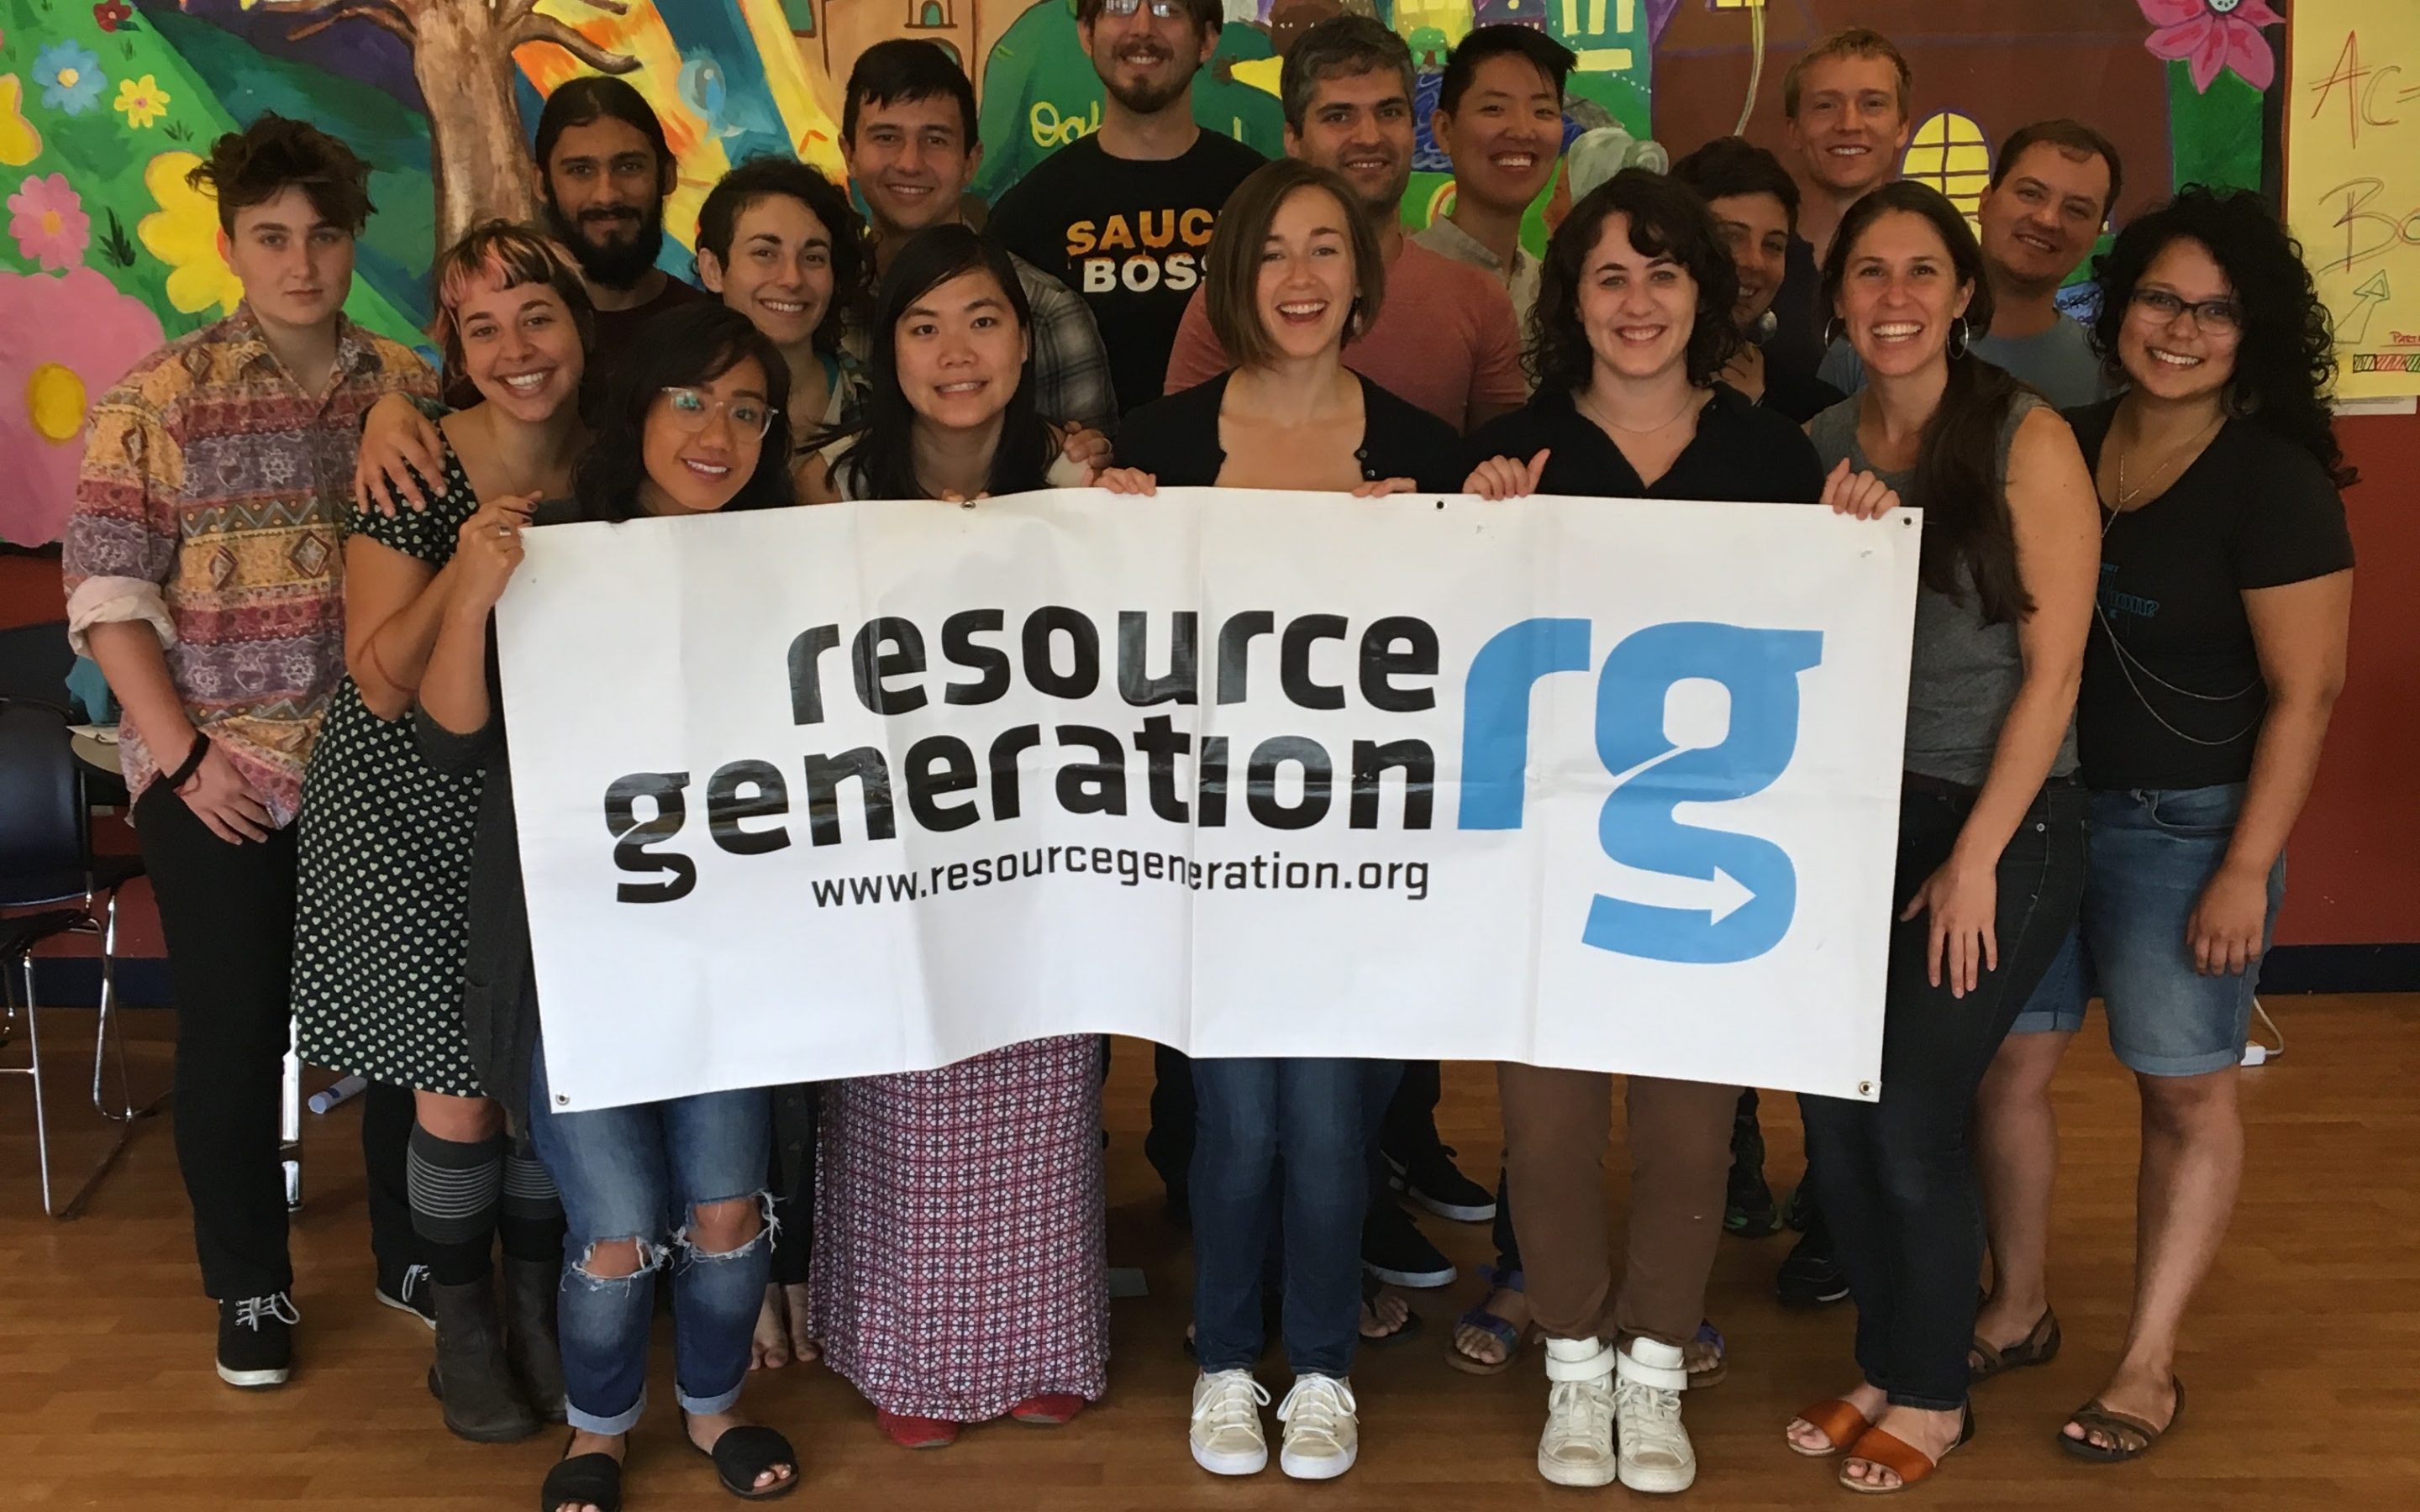 Are you RG’s next Chapter Organizing Director?